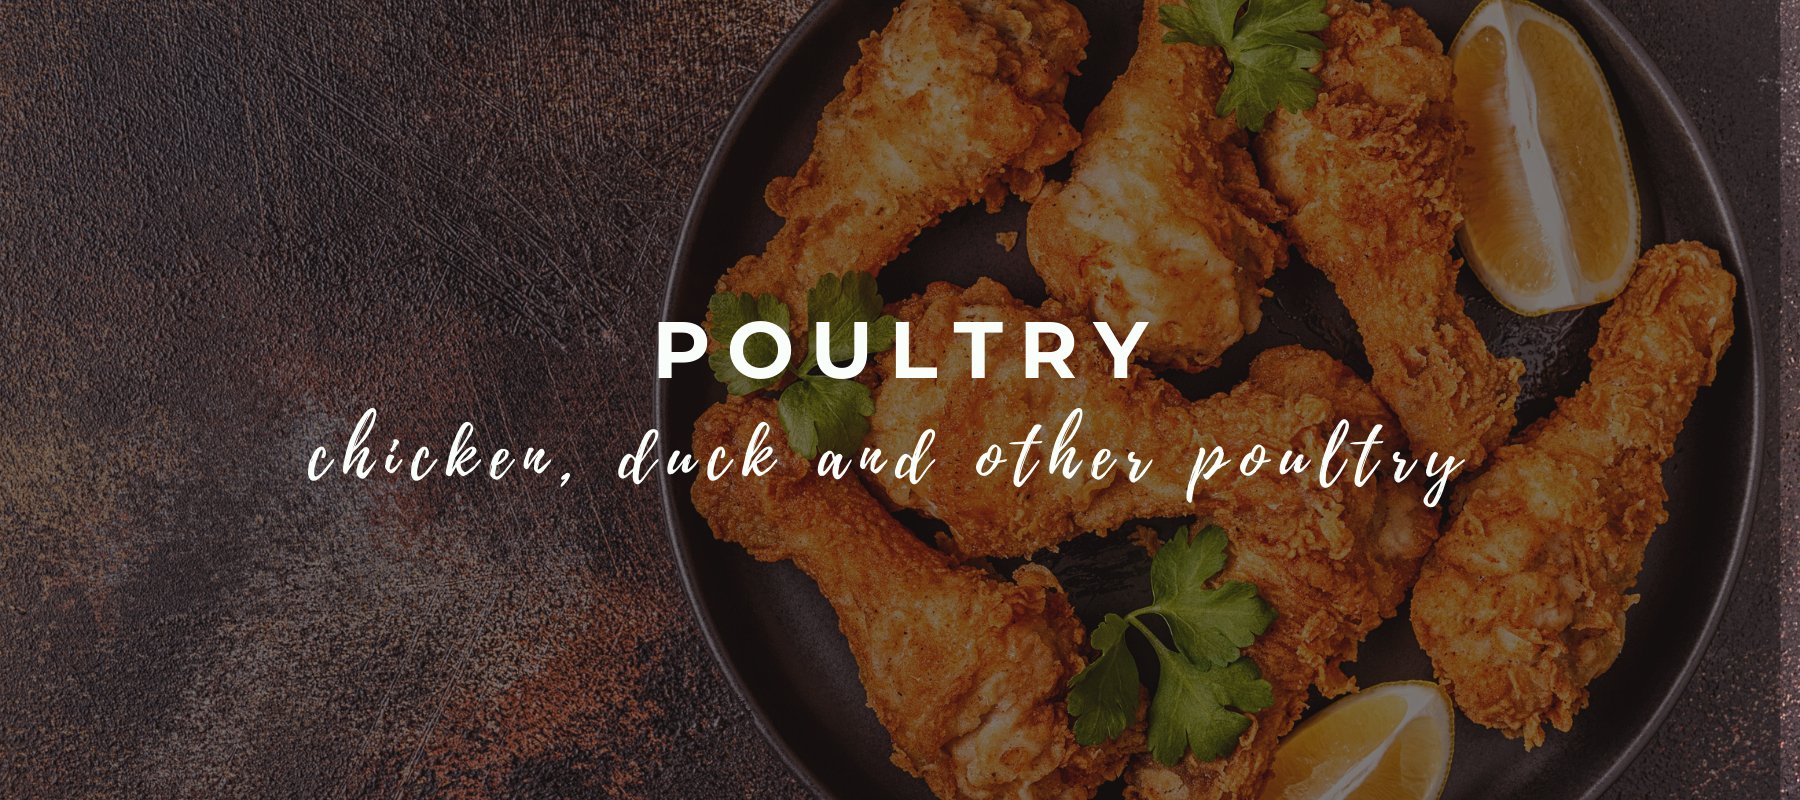 Poultry - FoodSt